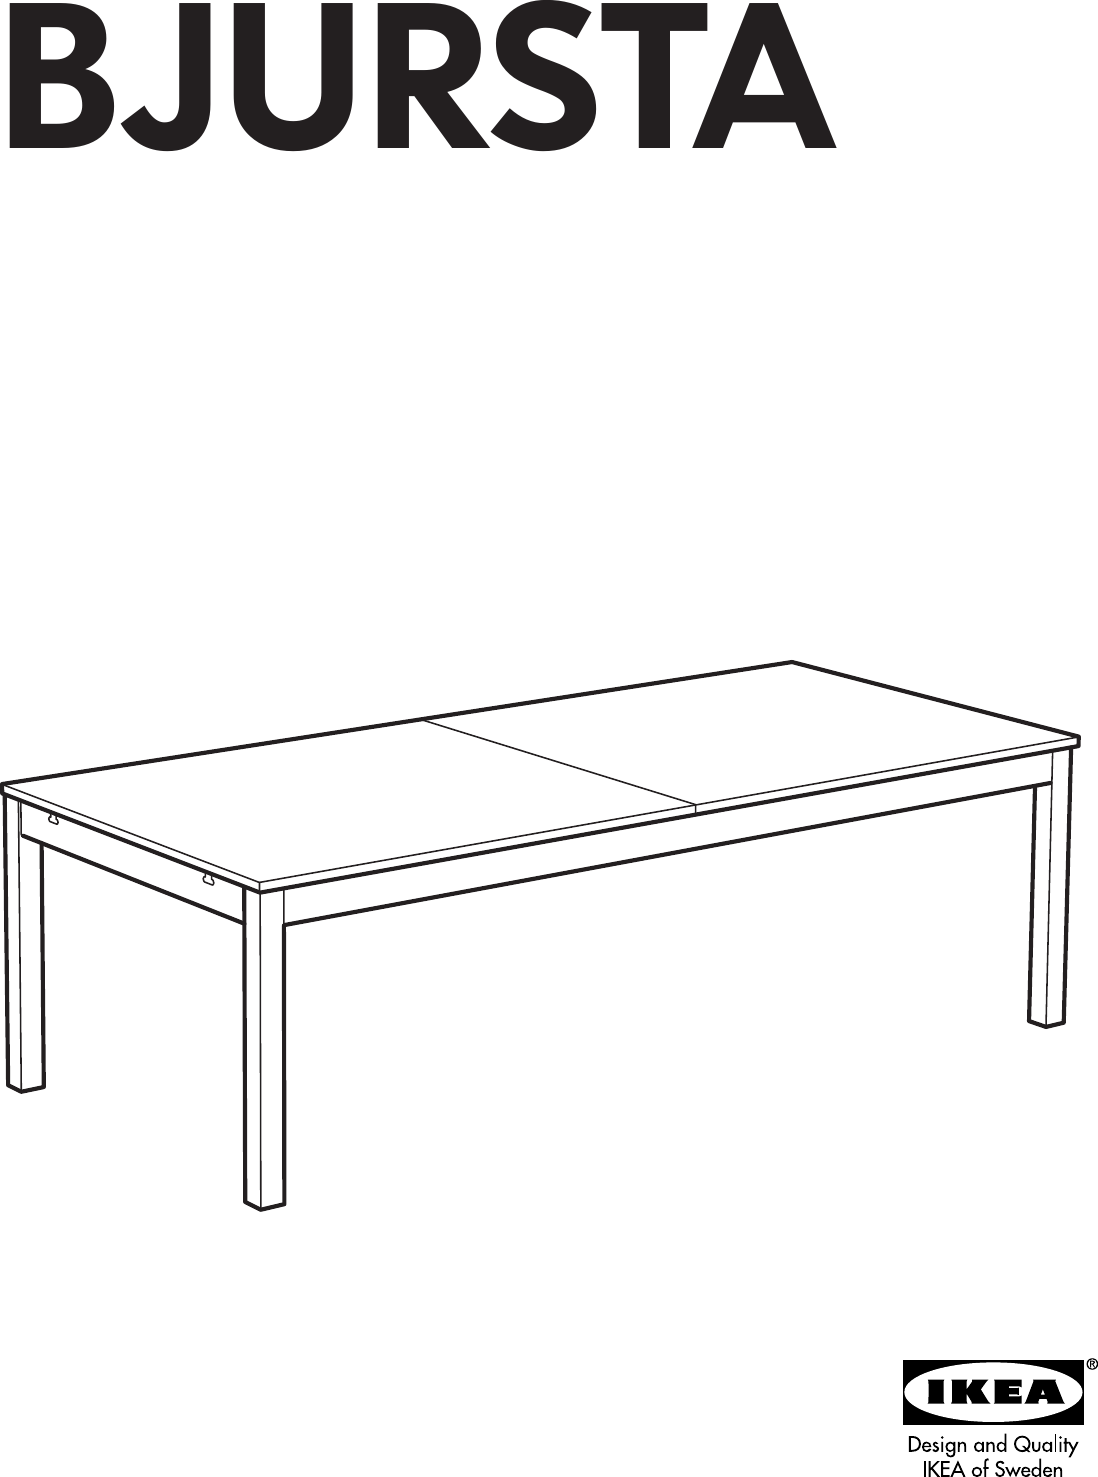 Page 1 of 12 - Ikea Ikea-Bjursta-Extendable-Dining-Table-94-114-133X43-Assembly-Instruction